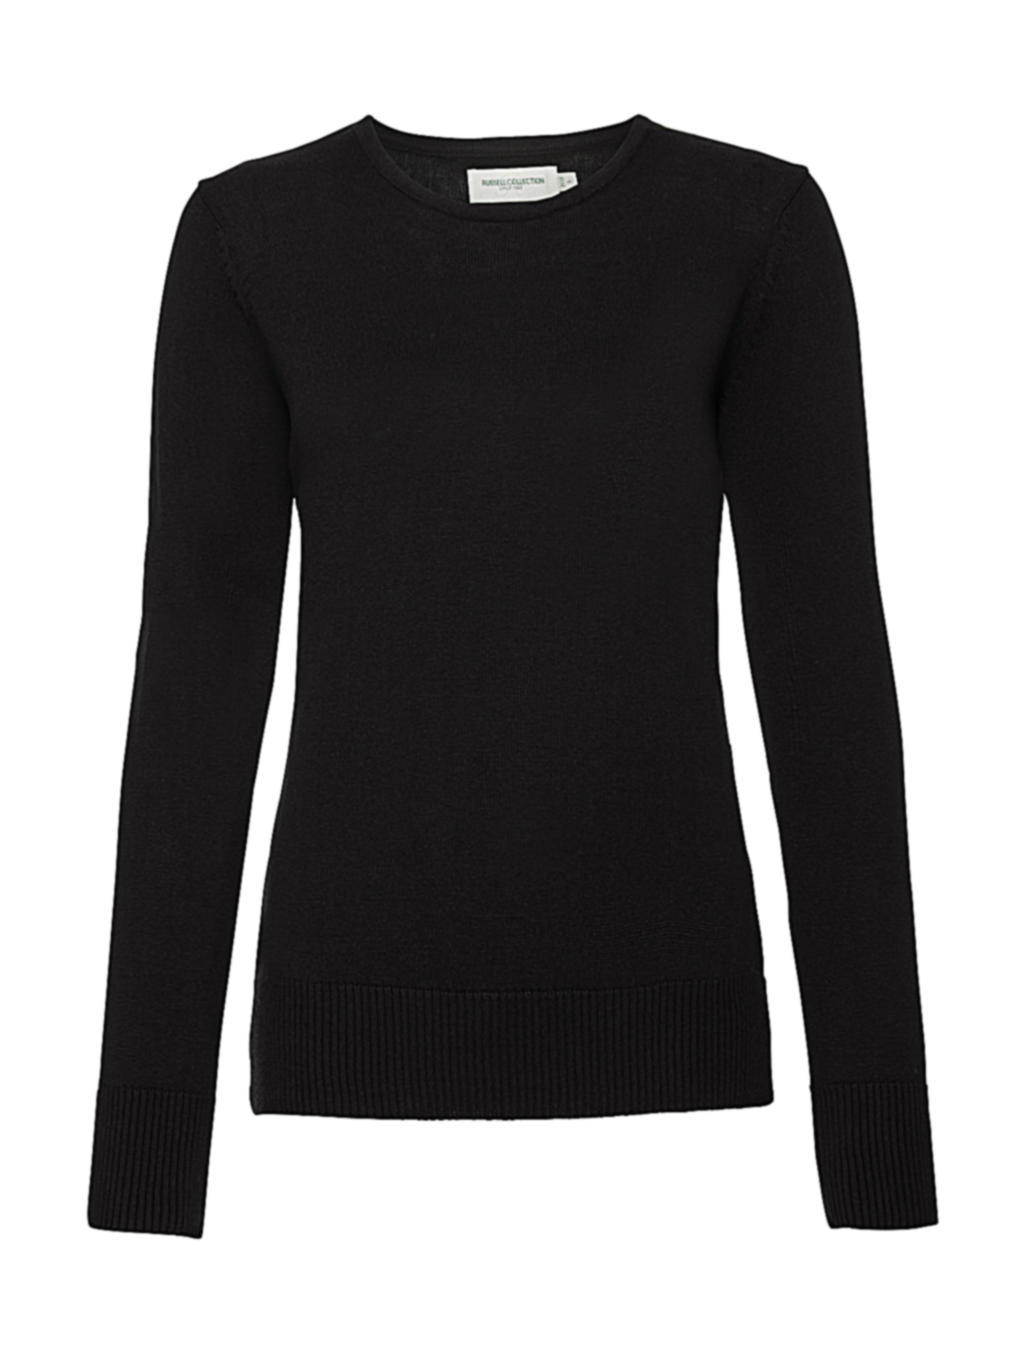  Ladies Crew Neck Knitted Pullover in Farbe Black